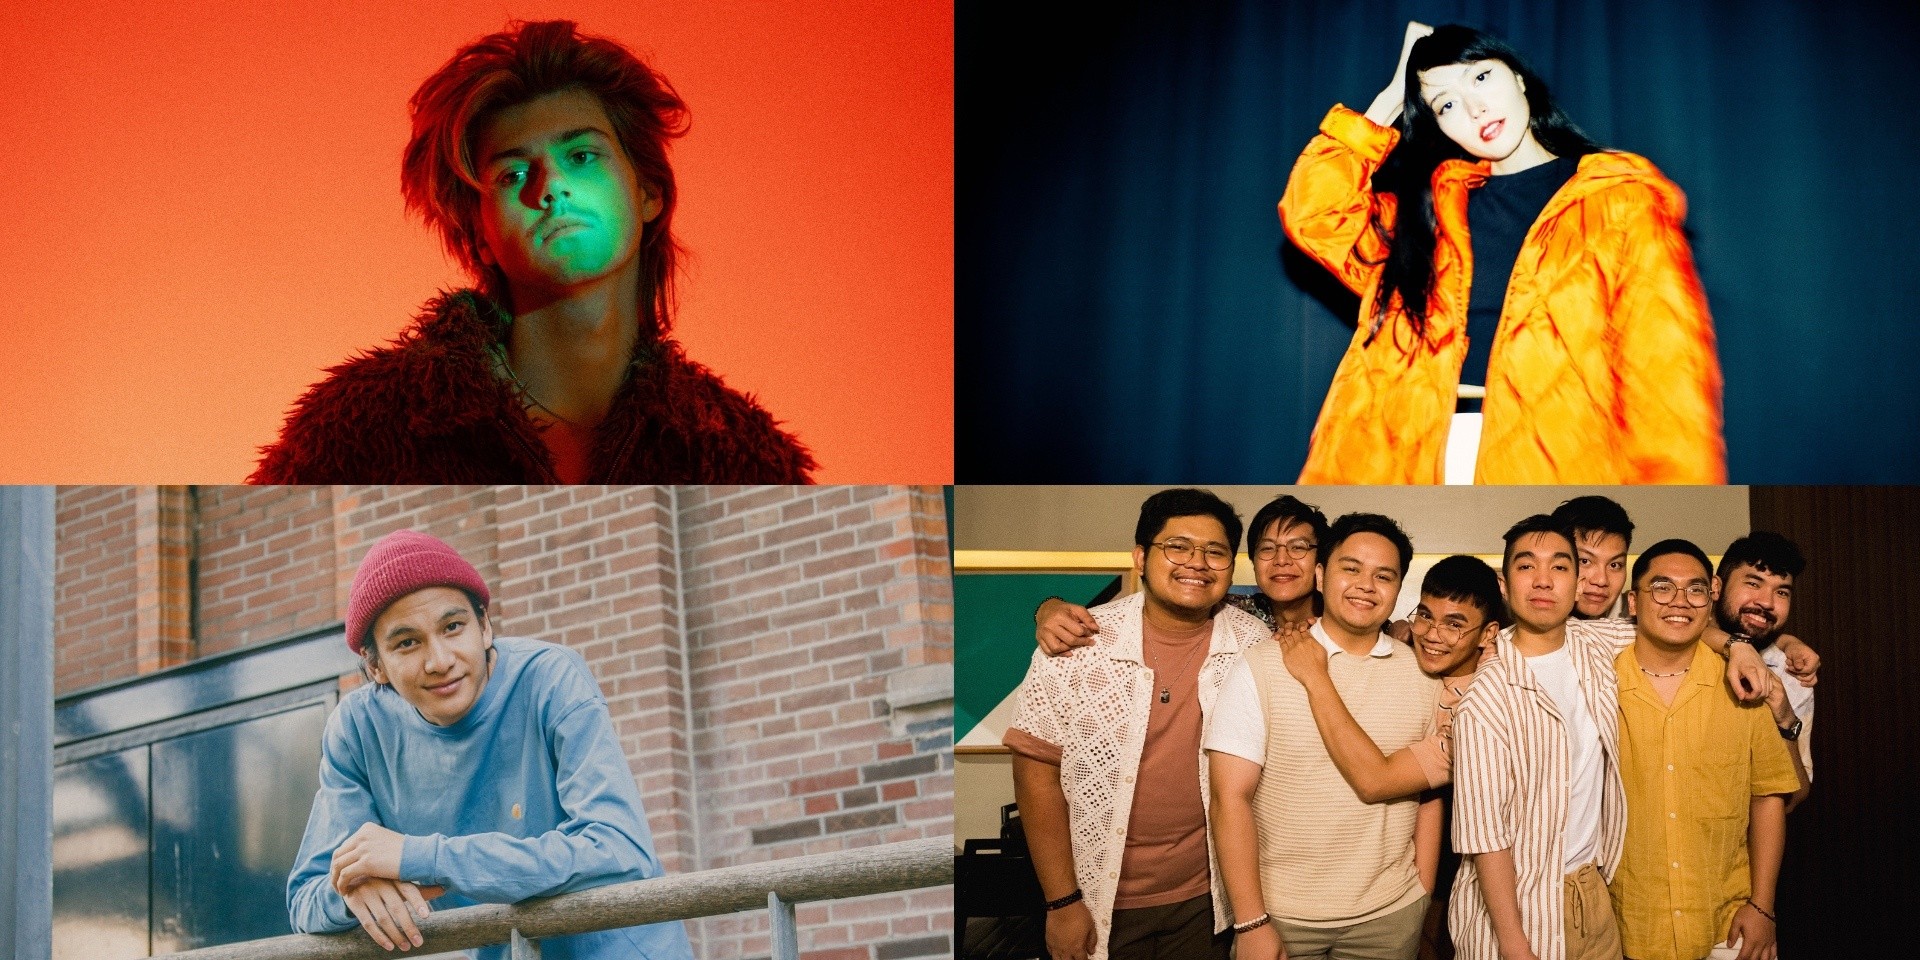 Ruel, Fazerdaze, Phum Viphurit, Lola Amour, and more to perform at Singapore's TRIFECTA Music Festival this November